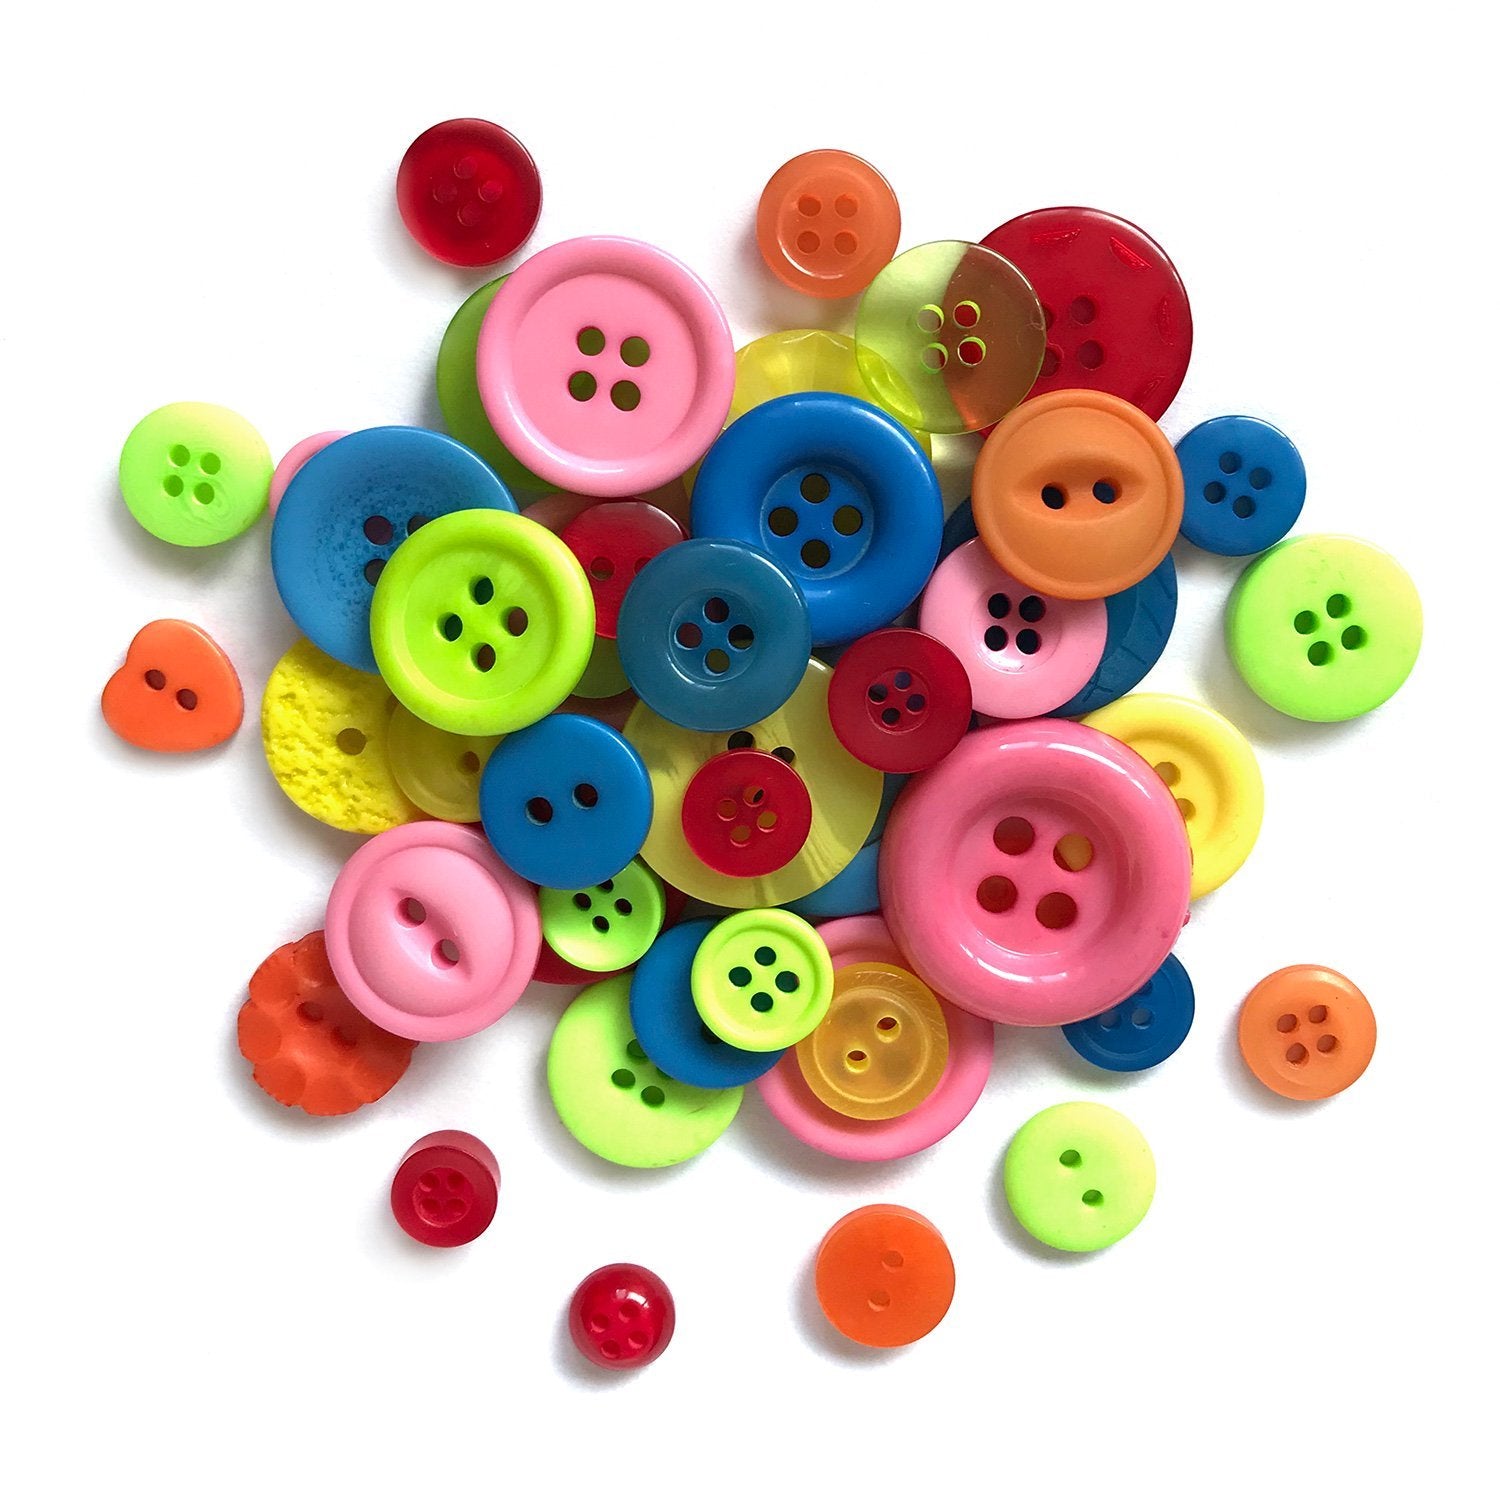 80pcs Colorful Buttons High Durability Reusable Colorful Sewing Buttons  Clothing